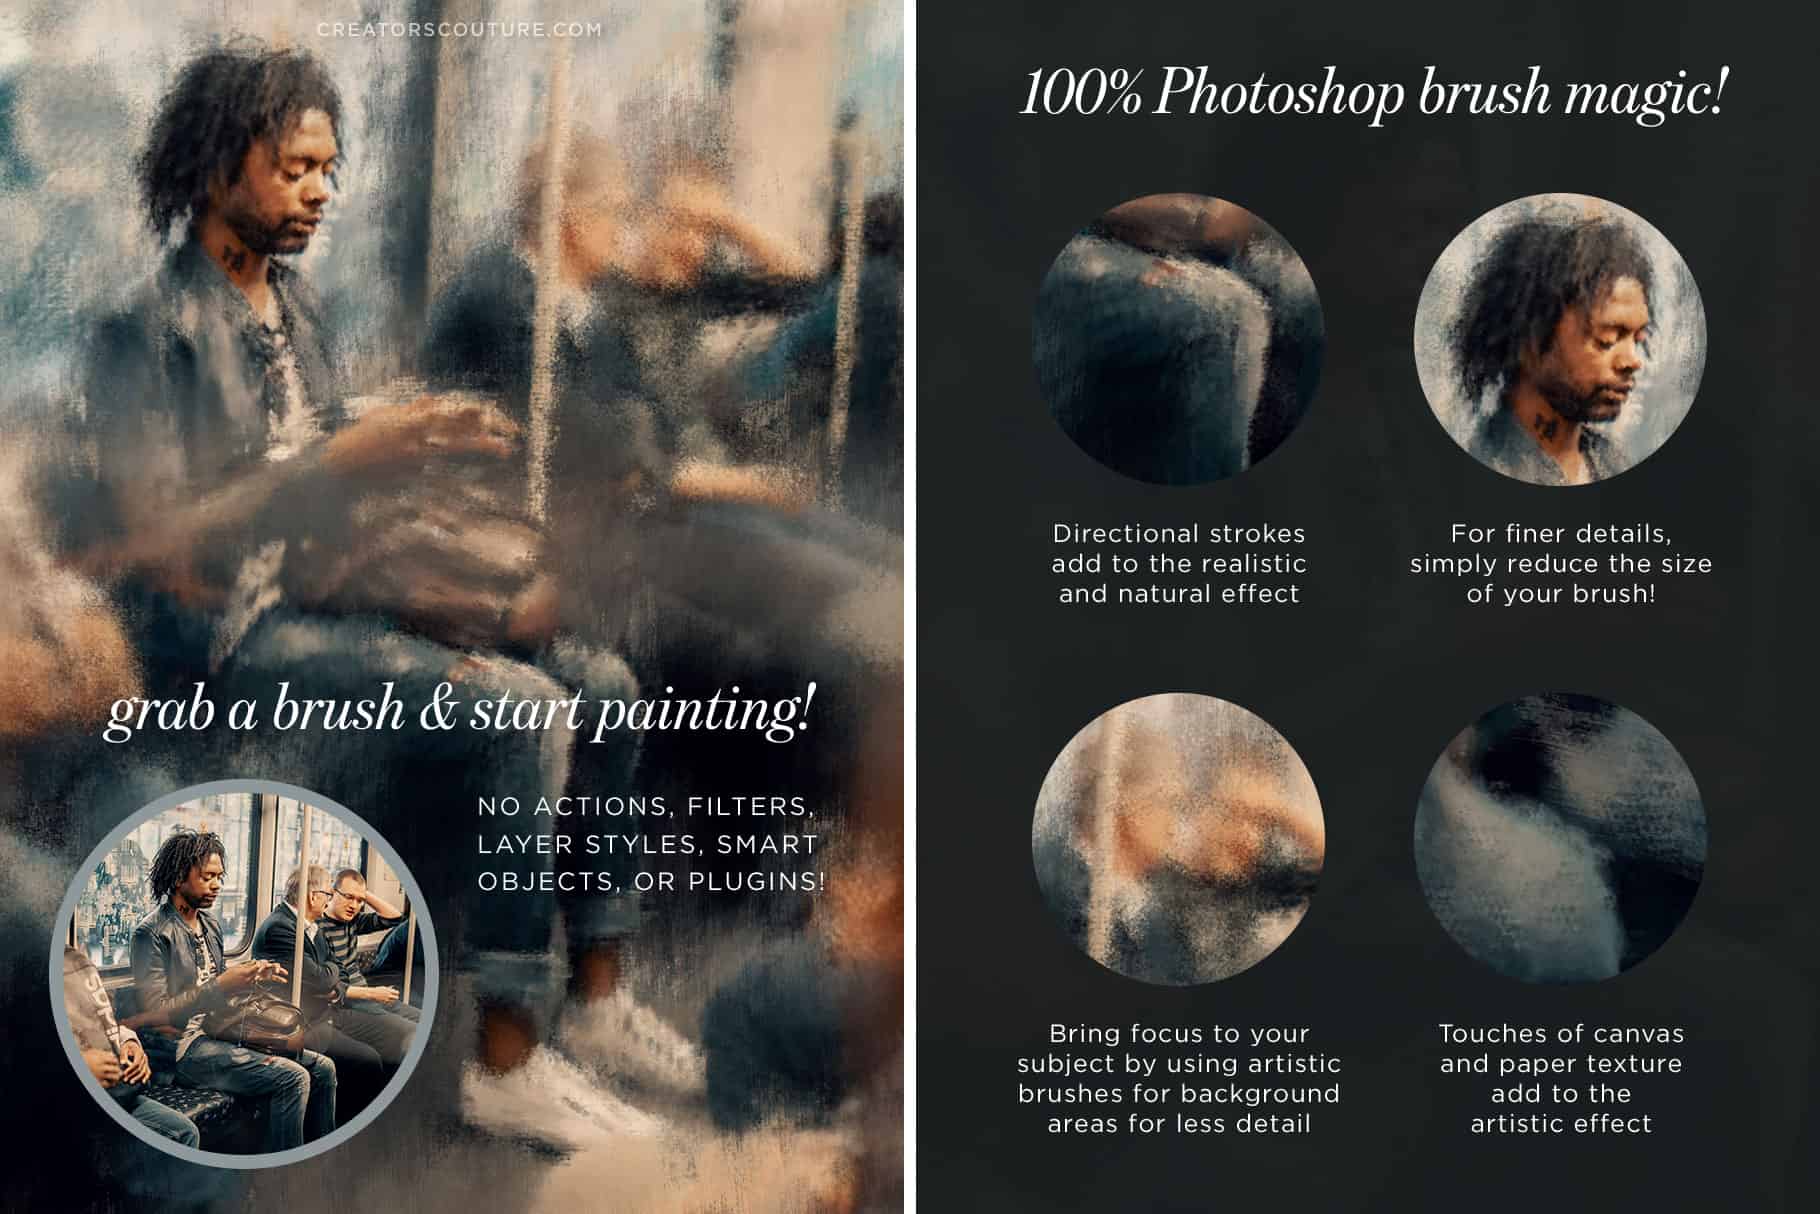 This explainer sheet describes how to use Photoshop brushes to create a painterly effect on a photograph. In this example, a Black man is sitting on a subway. Both the manipulated image and a selection of the unedited image are shown.